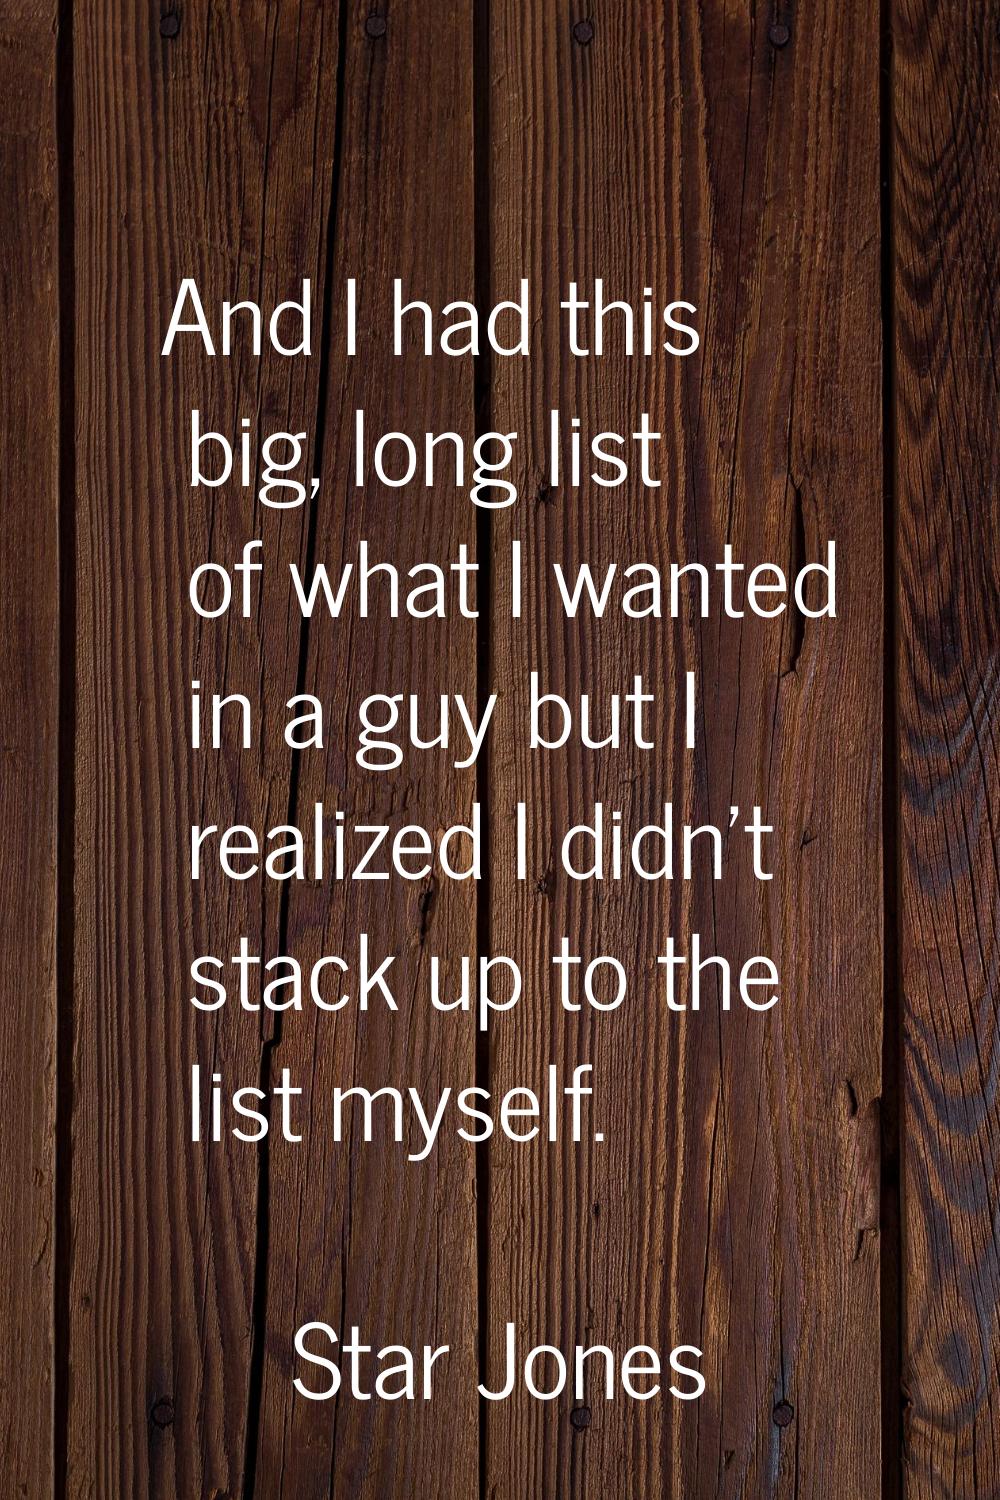 And I had this big, long list of what I wanted in a guy but I realized I didn't stack up to the lis